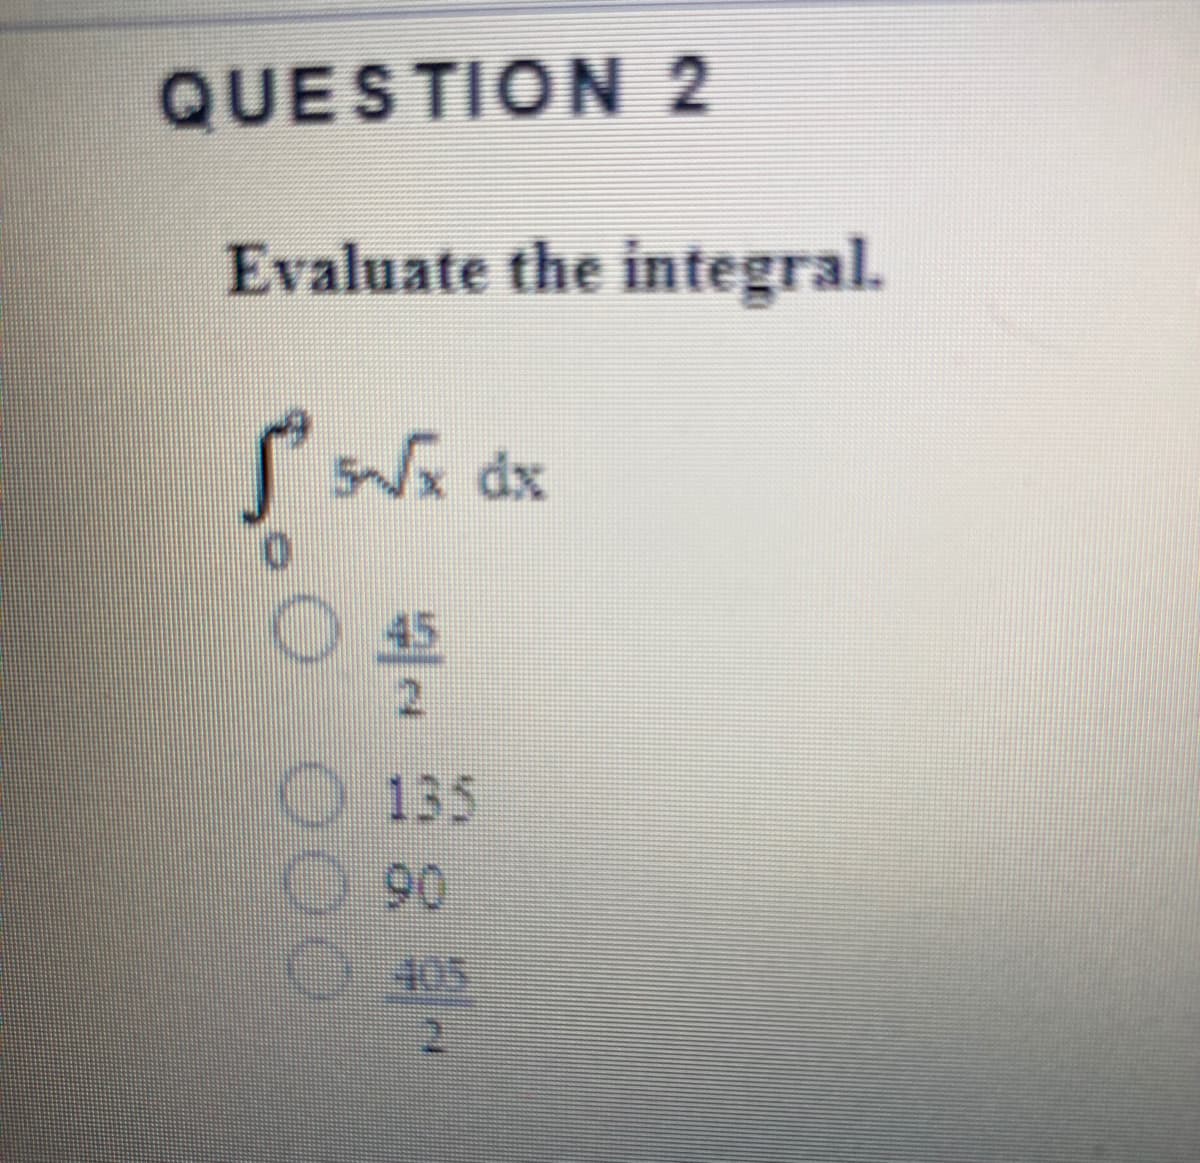 QUESTION 2
Evaluate the integral.
Nx dx
45
O 135
90
SOP
